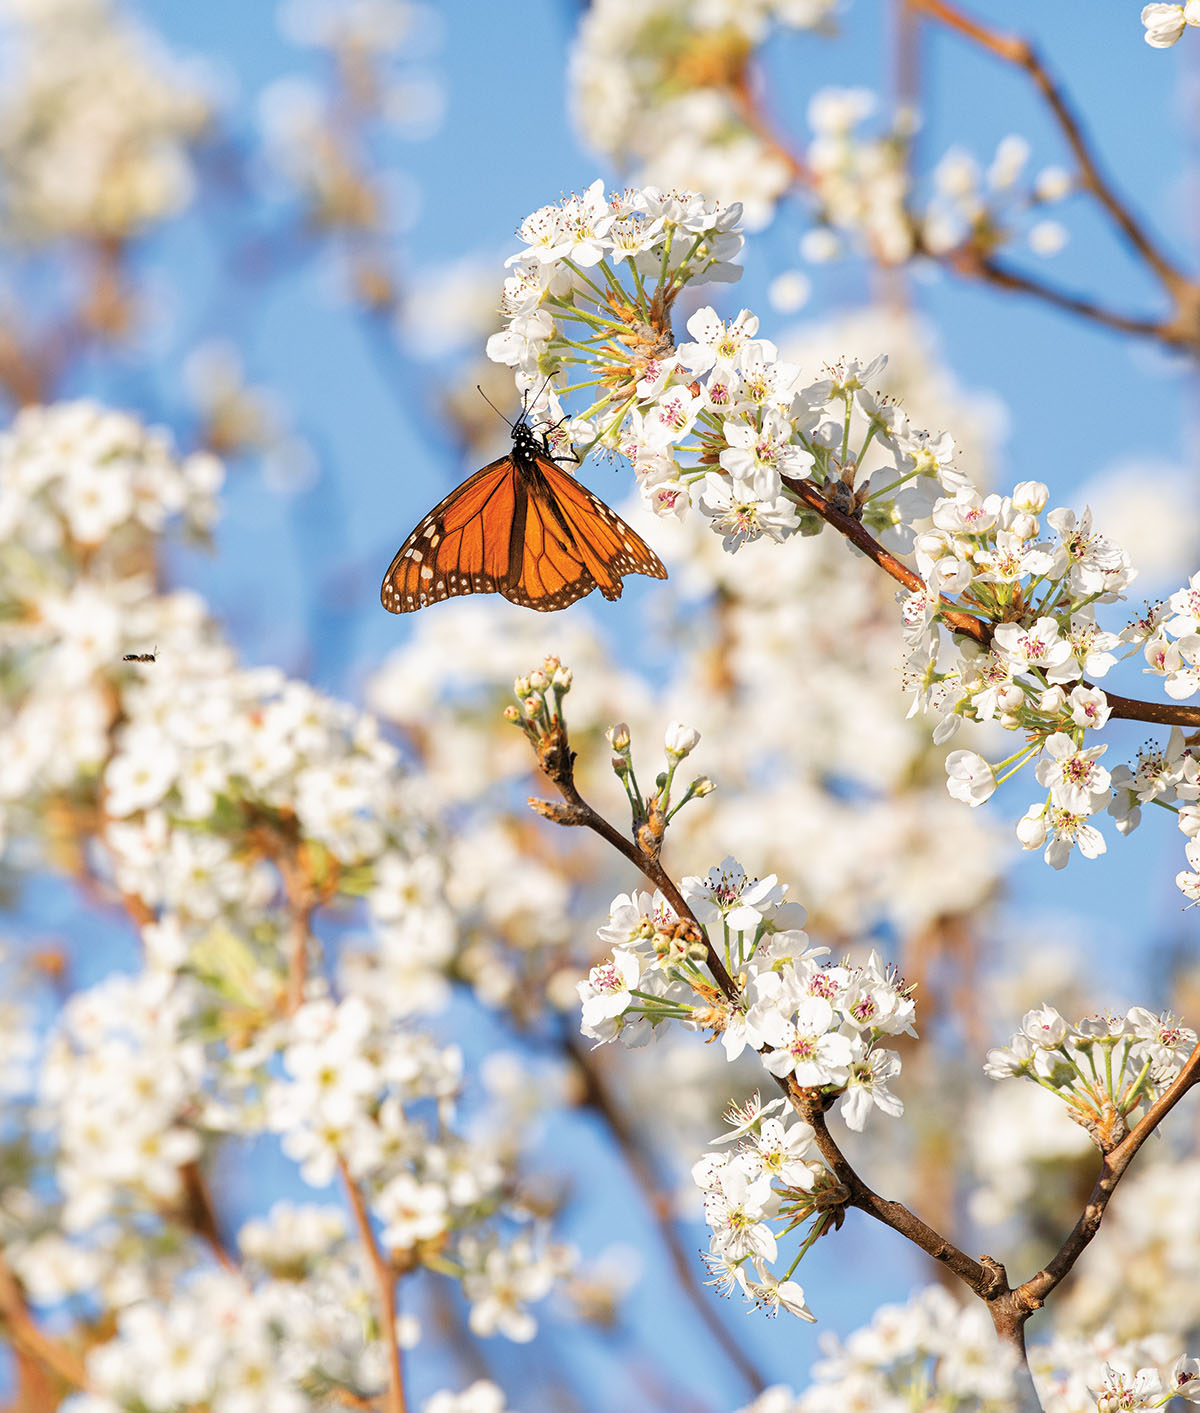 An orange Monarch butterfly lands on a bright white flower with a wooden stem